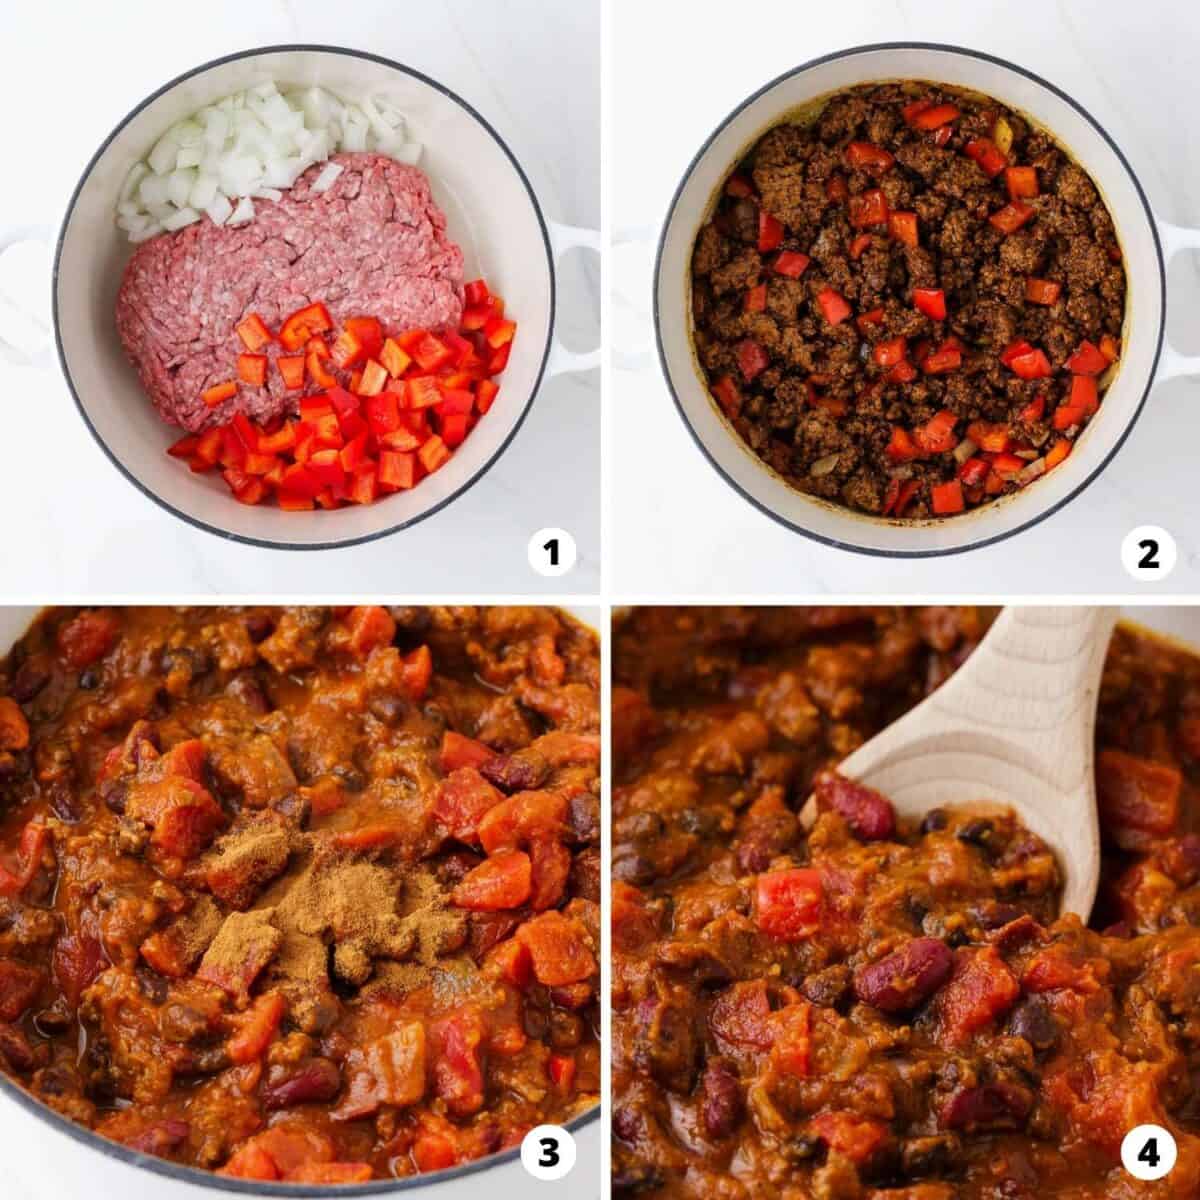 The process of making pumpkin chili in a four step photo collage.